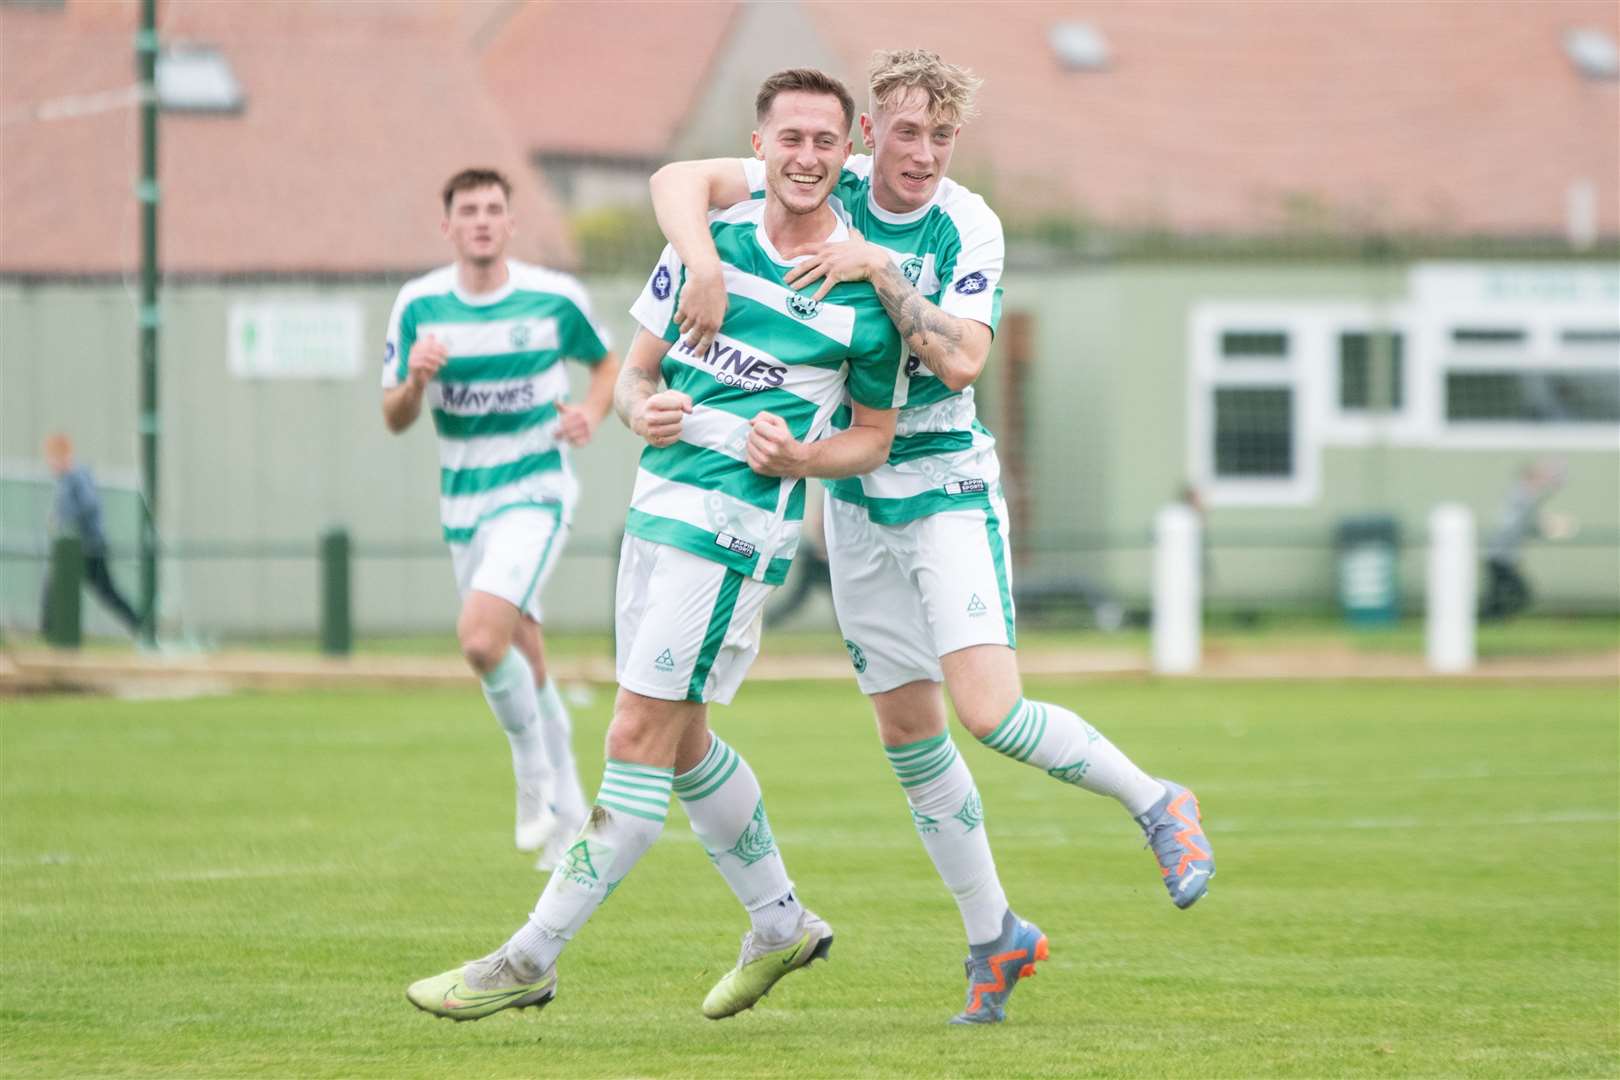 Buckie Thistle's Dale Wood (centre) celebrates his goal with Jack Maciver...Buckie Thistle FC (6) vs Nairn County FC (0) - Highland Football League 23/24 - Victoria Park, Buckie 30/09/2023...Picture: Daniel Forsyth..